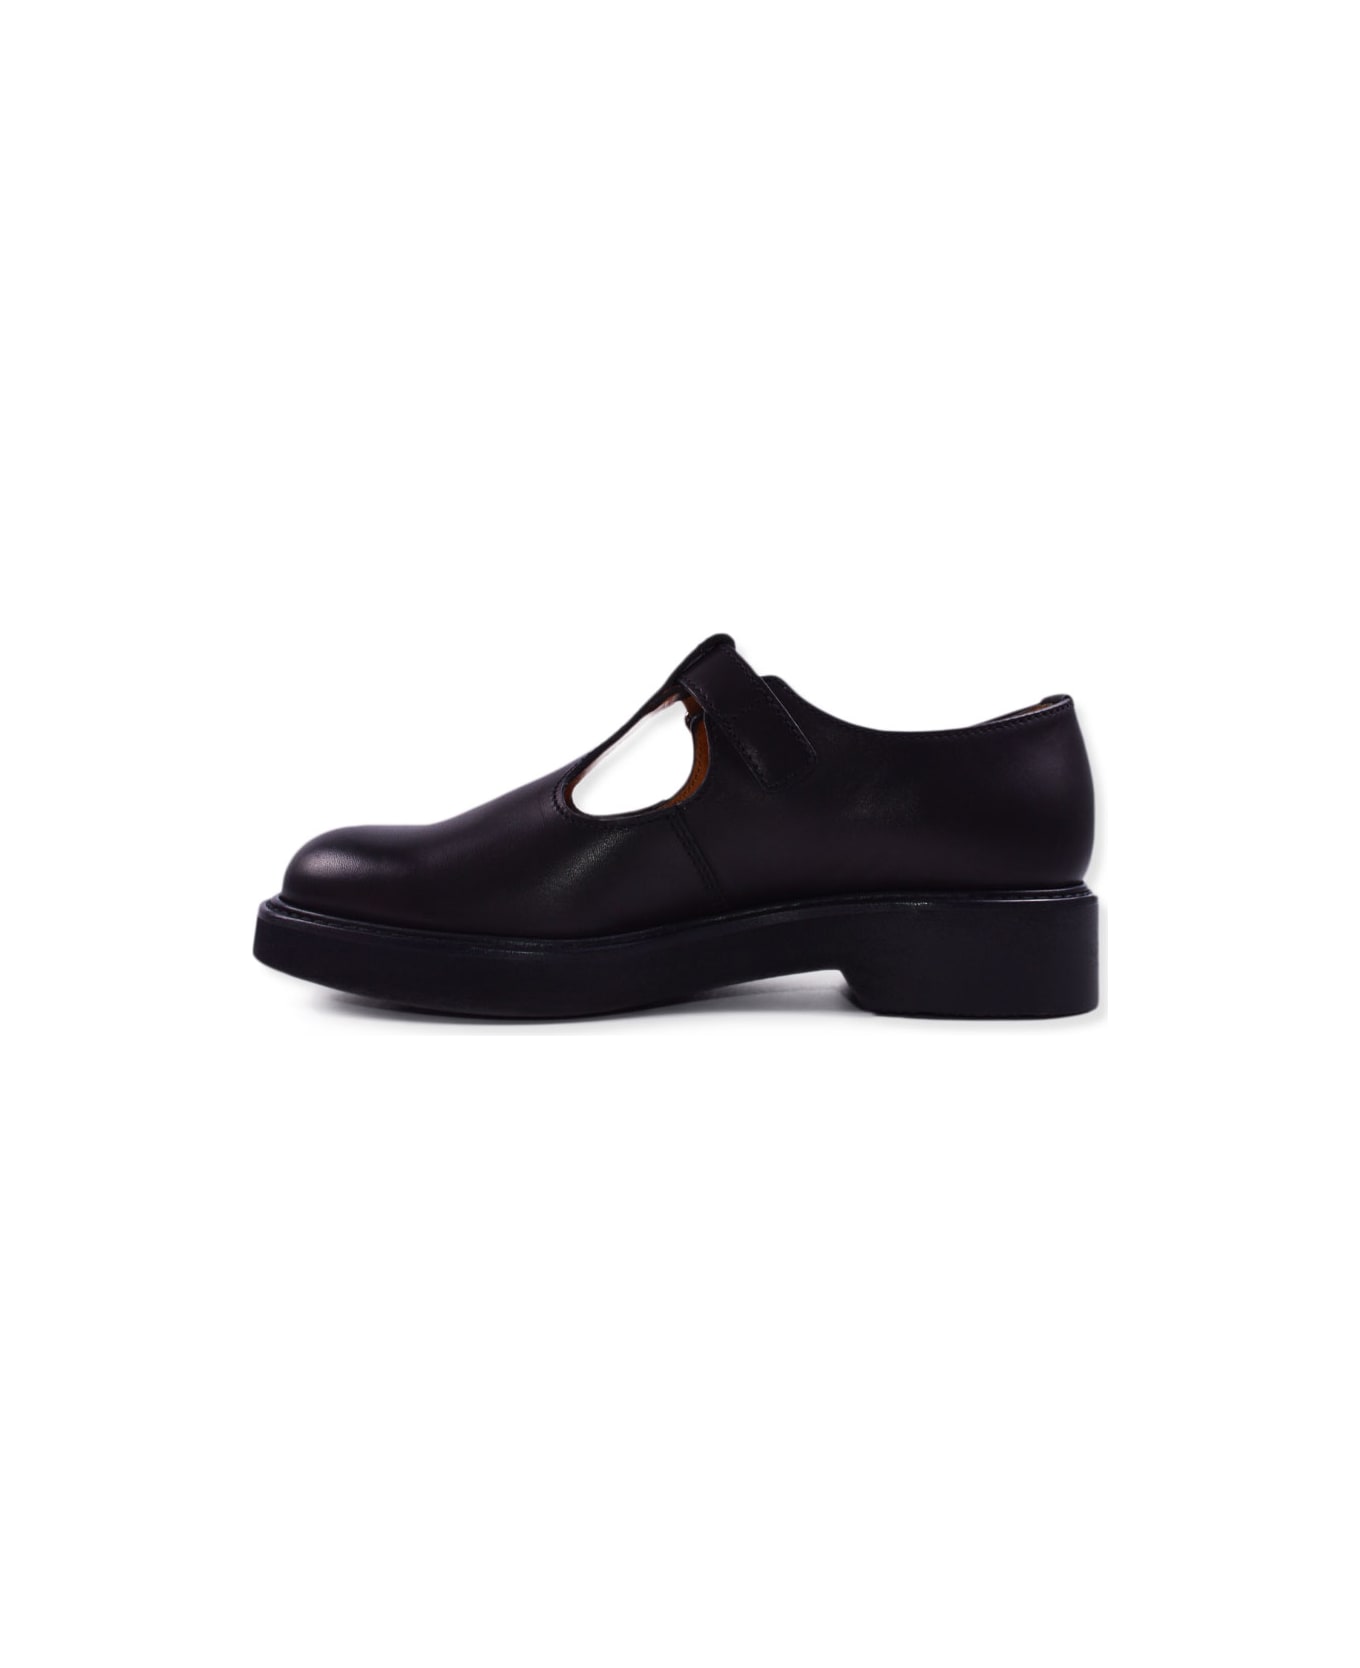 Church's Leather Sandals With Buckle - Black サンダル